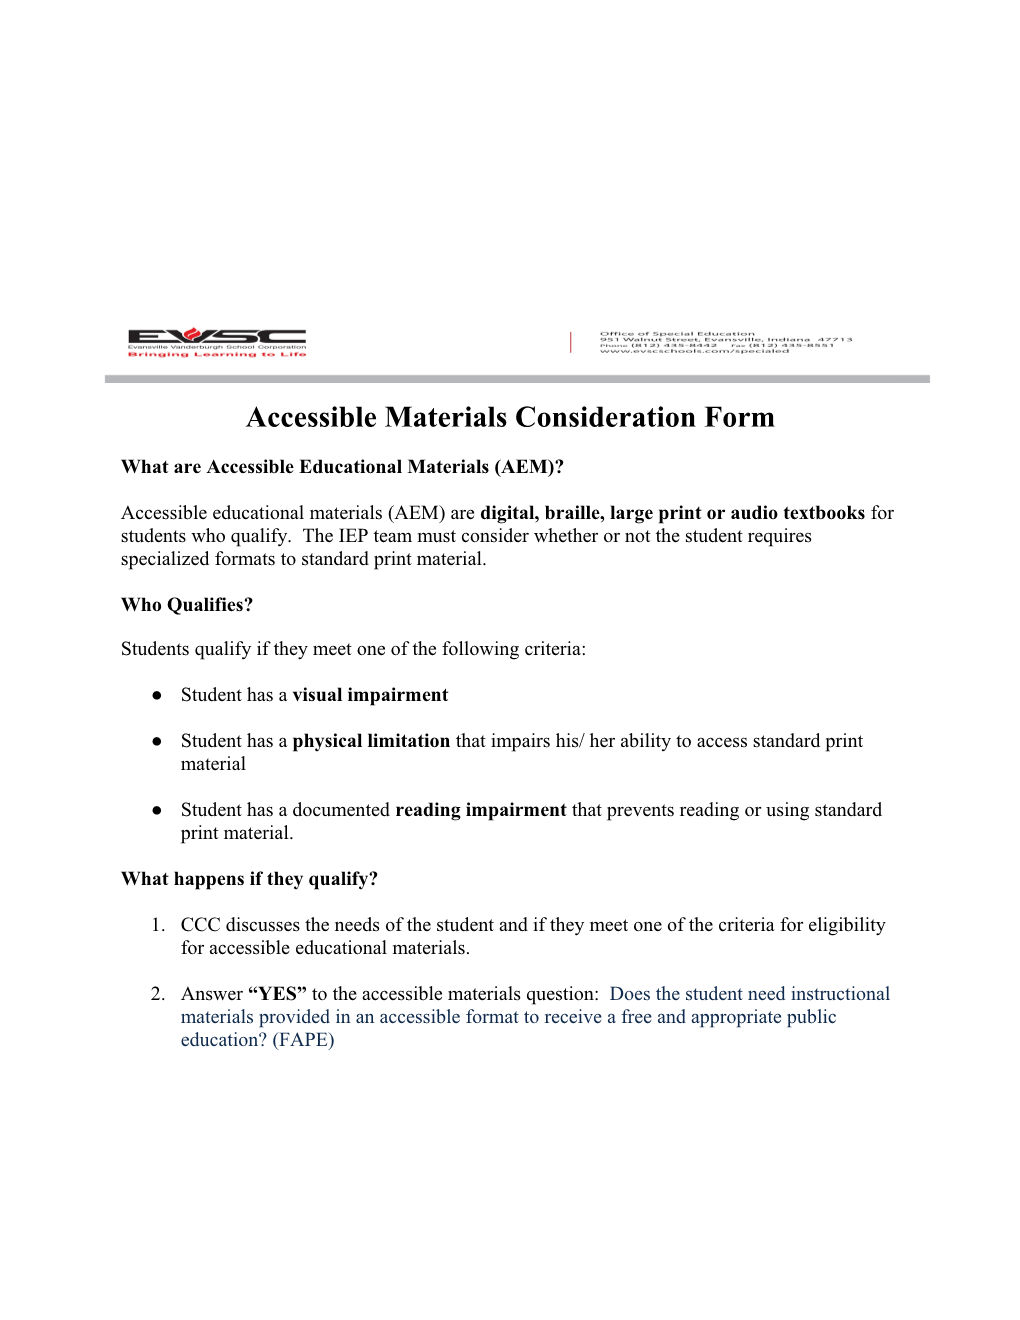 Accessible Materials Consideration Form